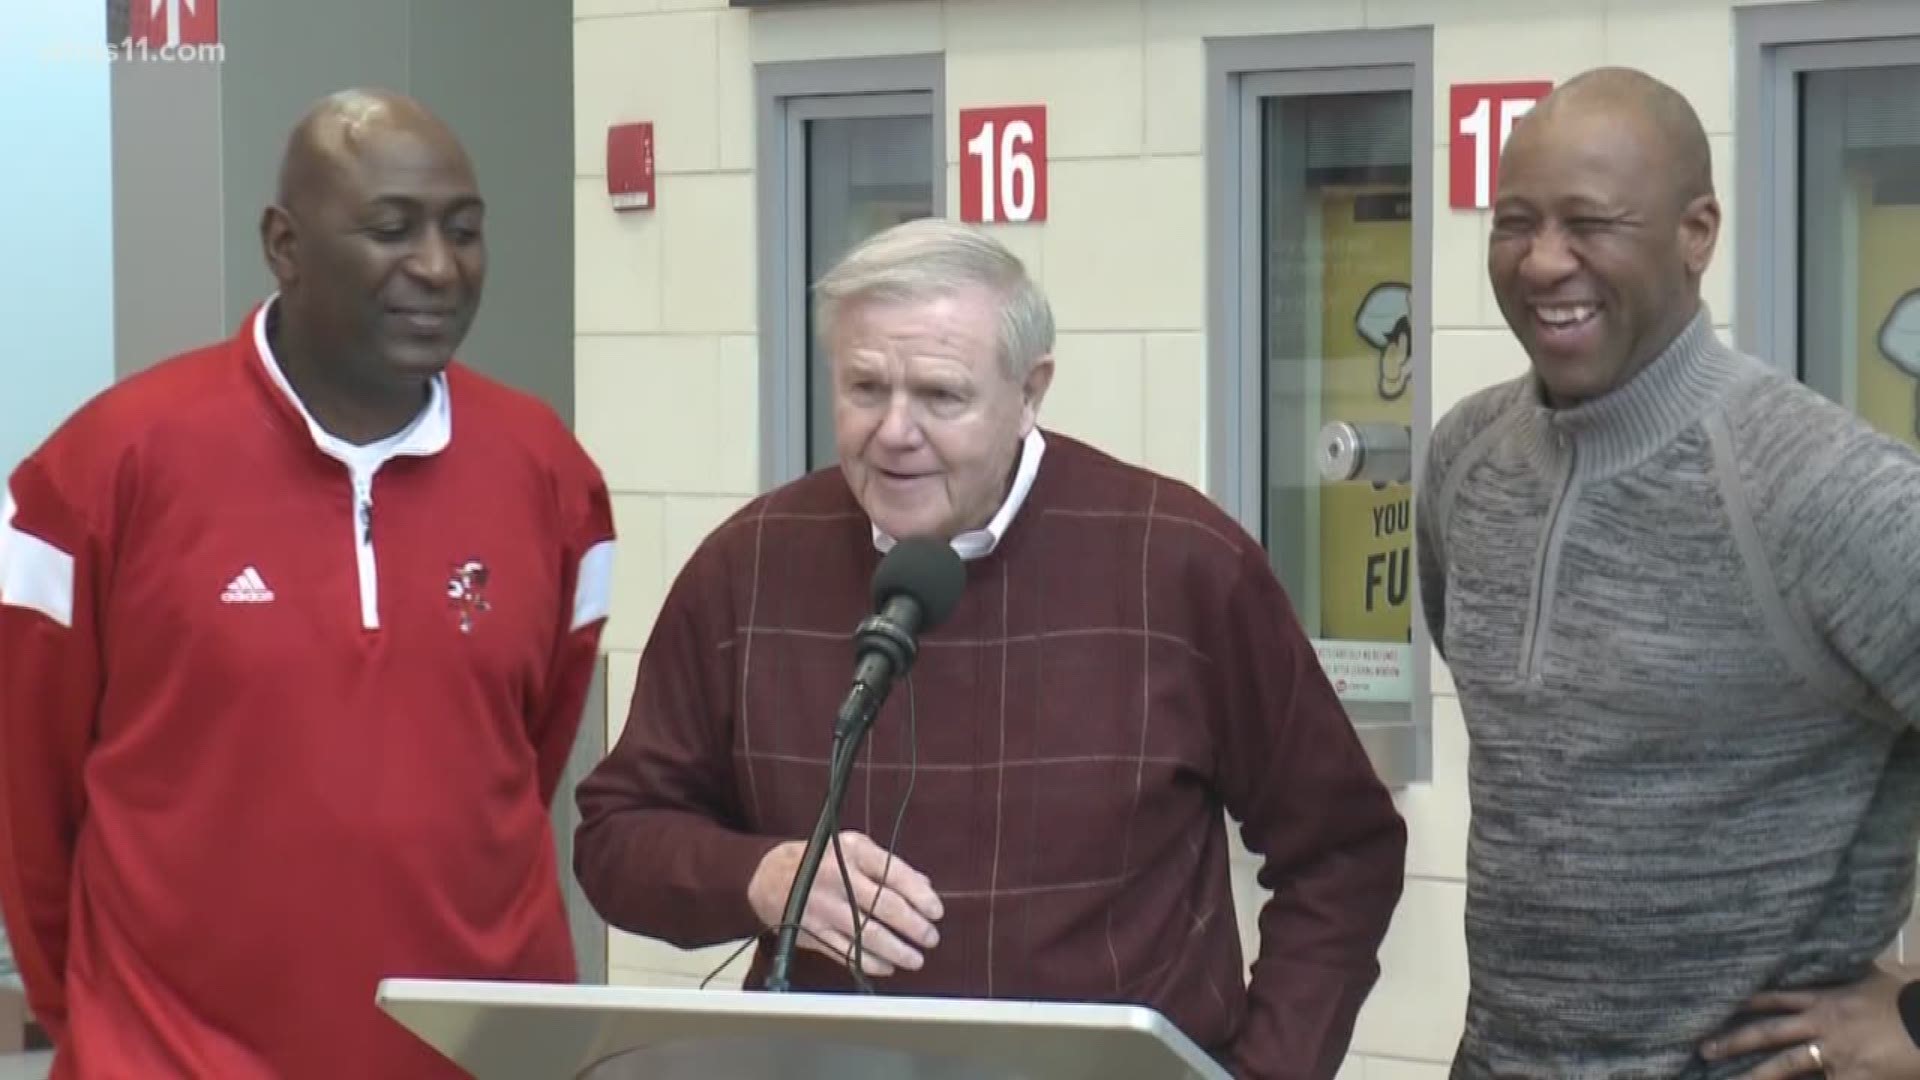 Just a week after having a stroke, Coach Denny Crum has been released from the hospital.